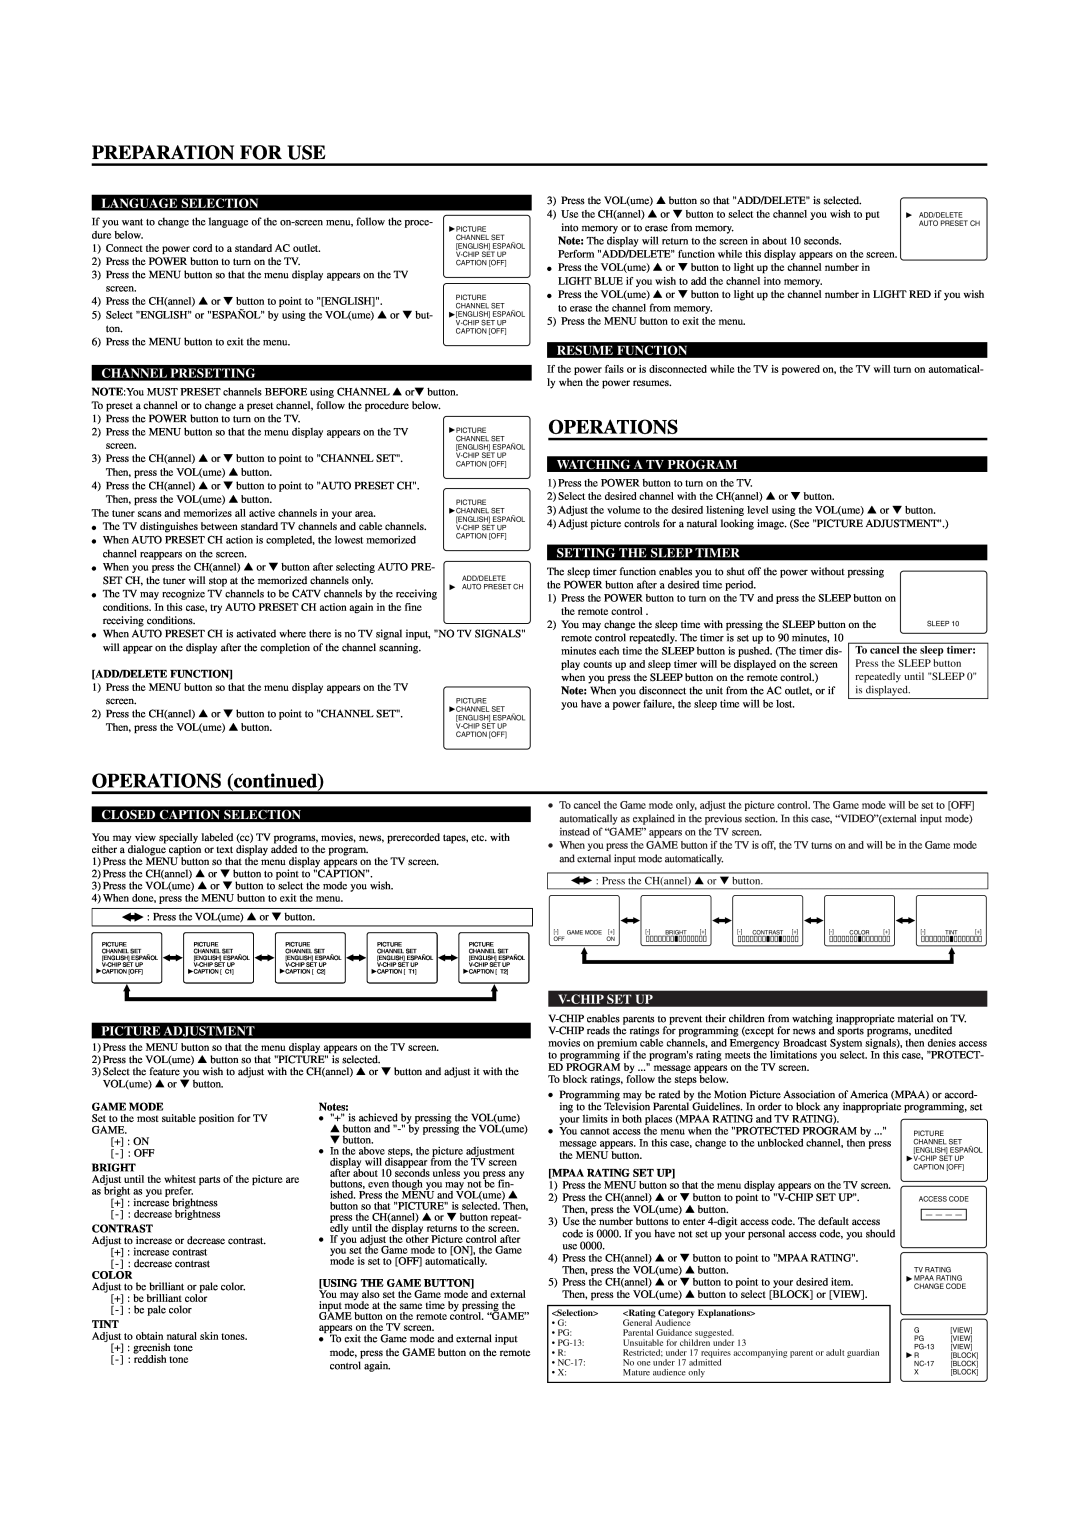 Sylvania SRT2313A, SRT2319A Preparation For Use, Operations, OPERATIONS continued, Language Selection, Resume Function 